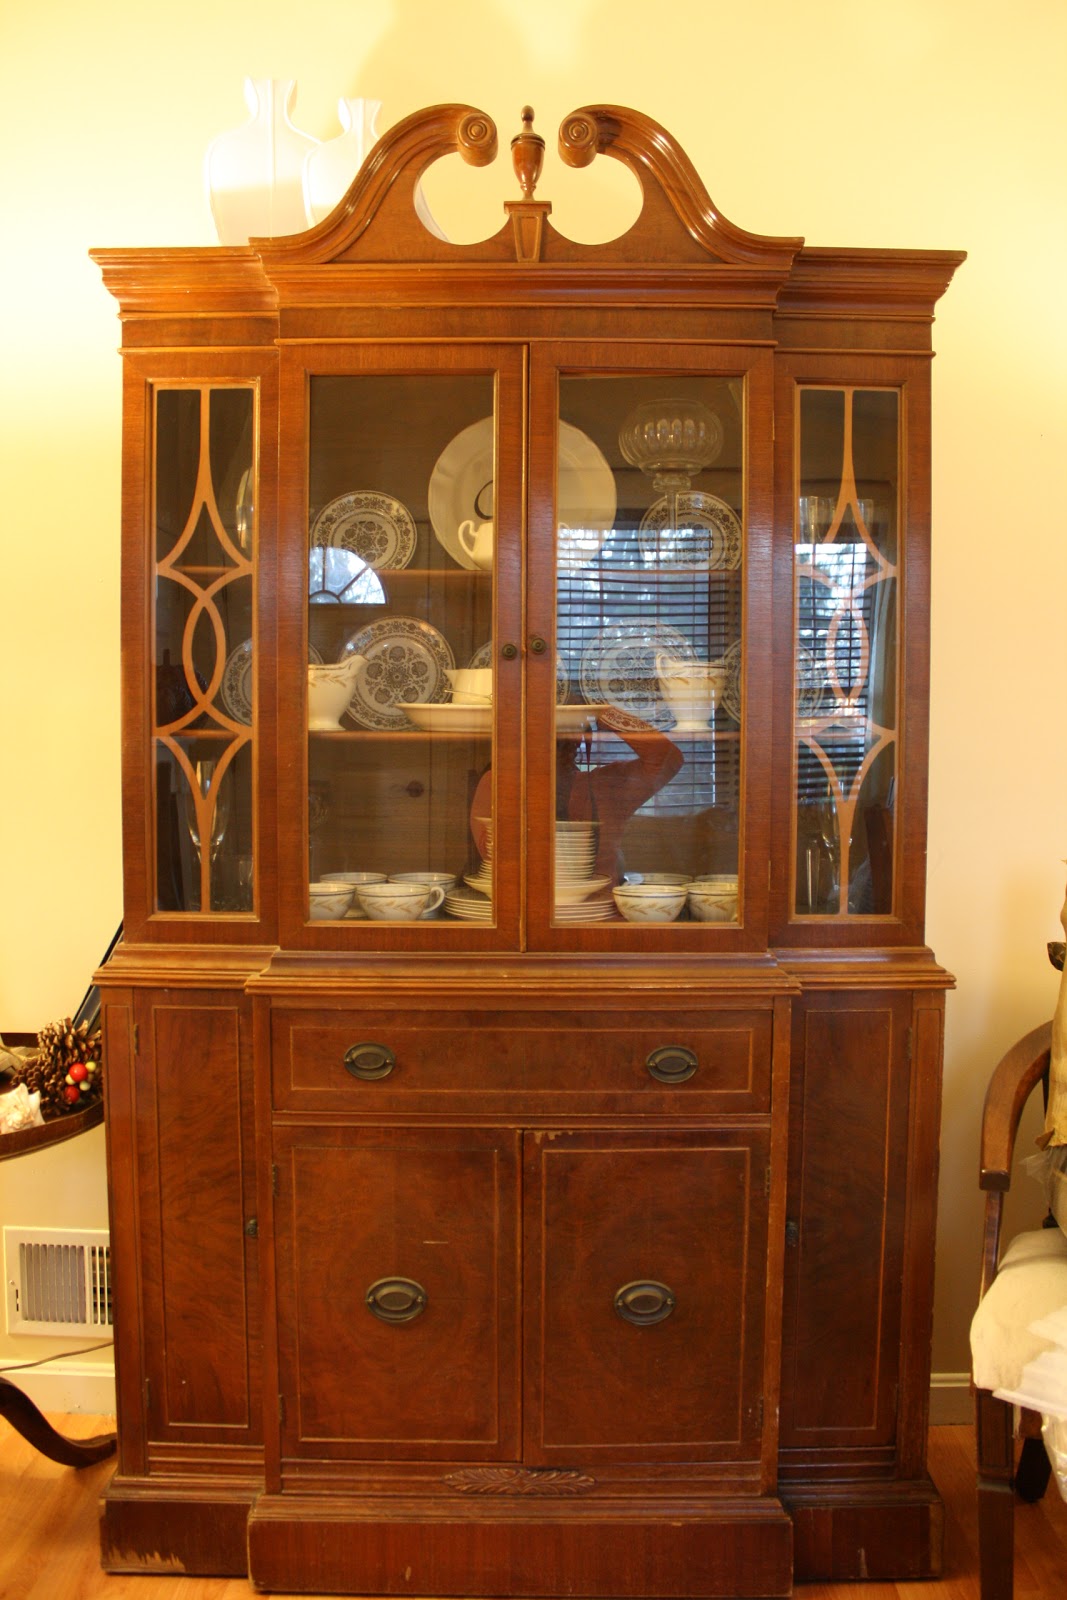 Spray Painted China Cabinet Makeover, Should I Paint My China Cabinet